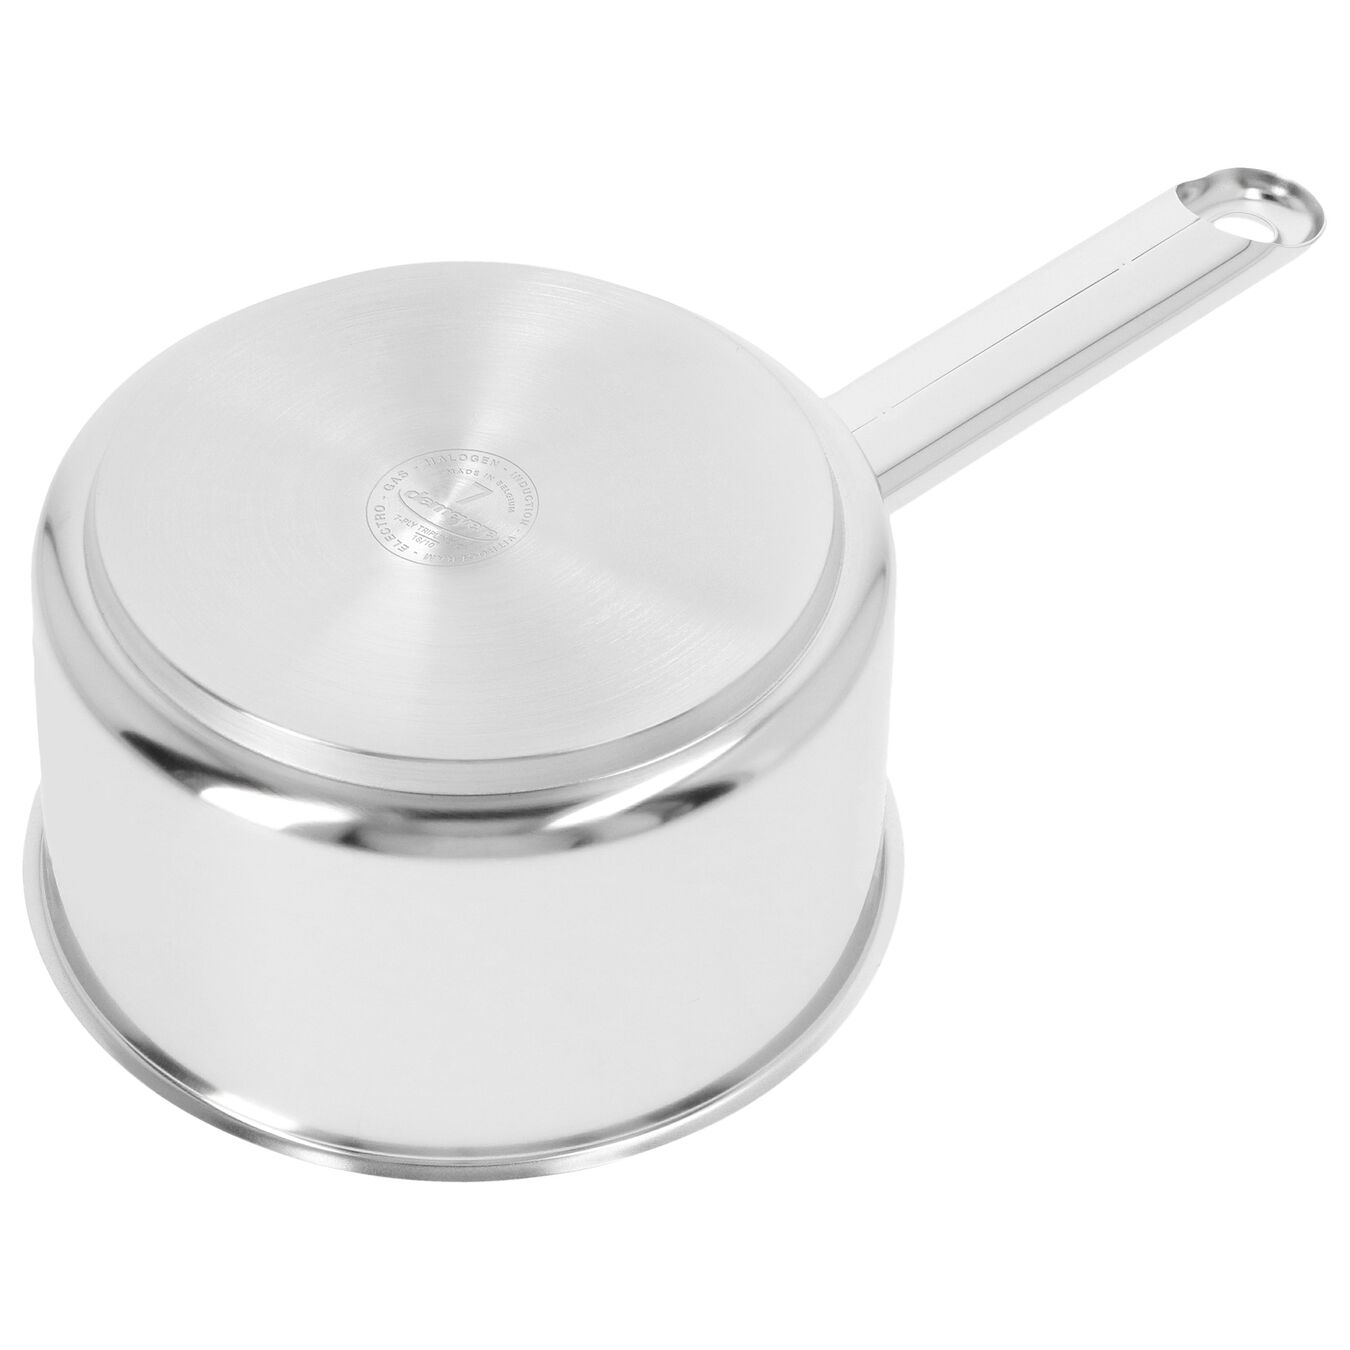 14 cm 18/10 Stainless Steel Saucepan without lid silver,,large 4